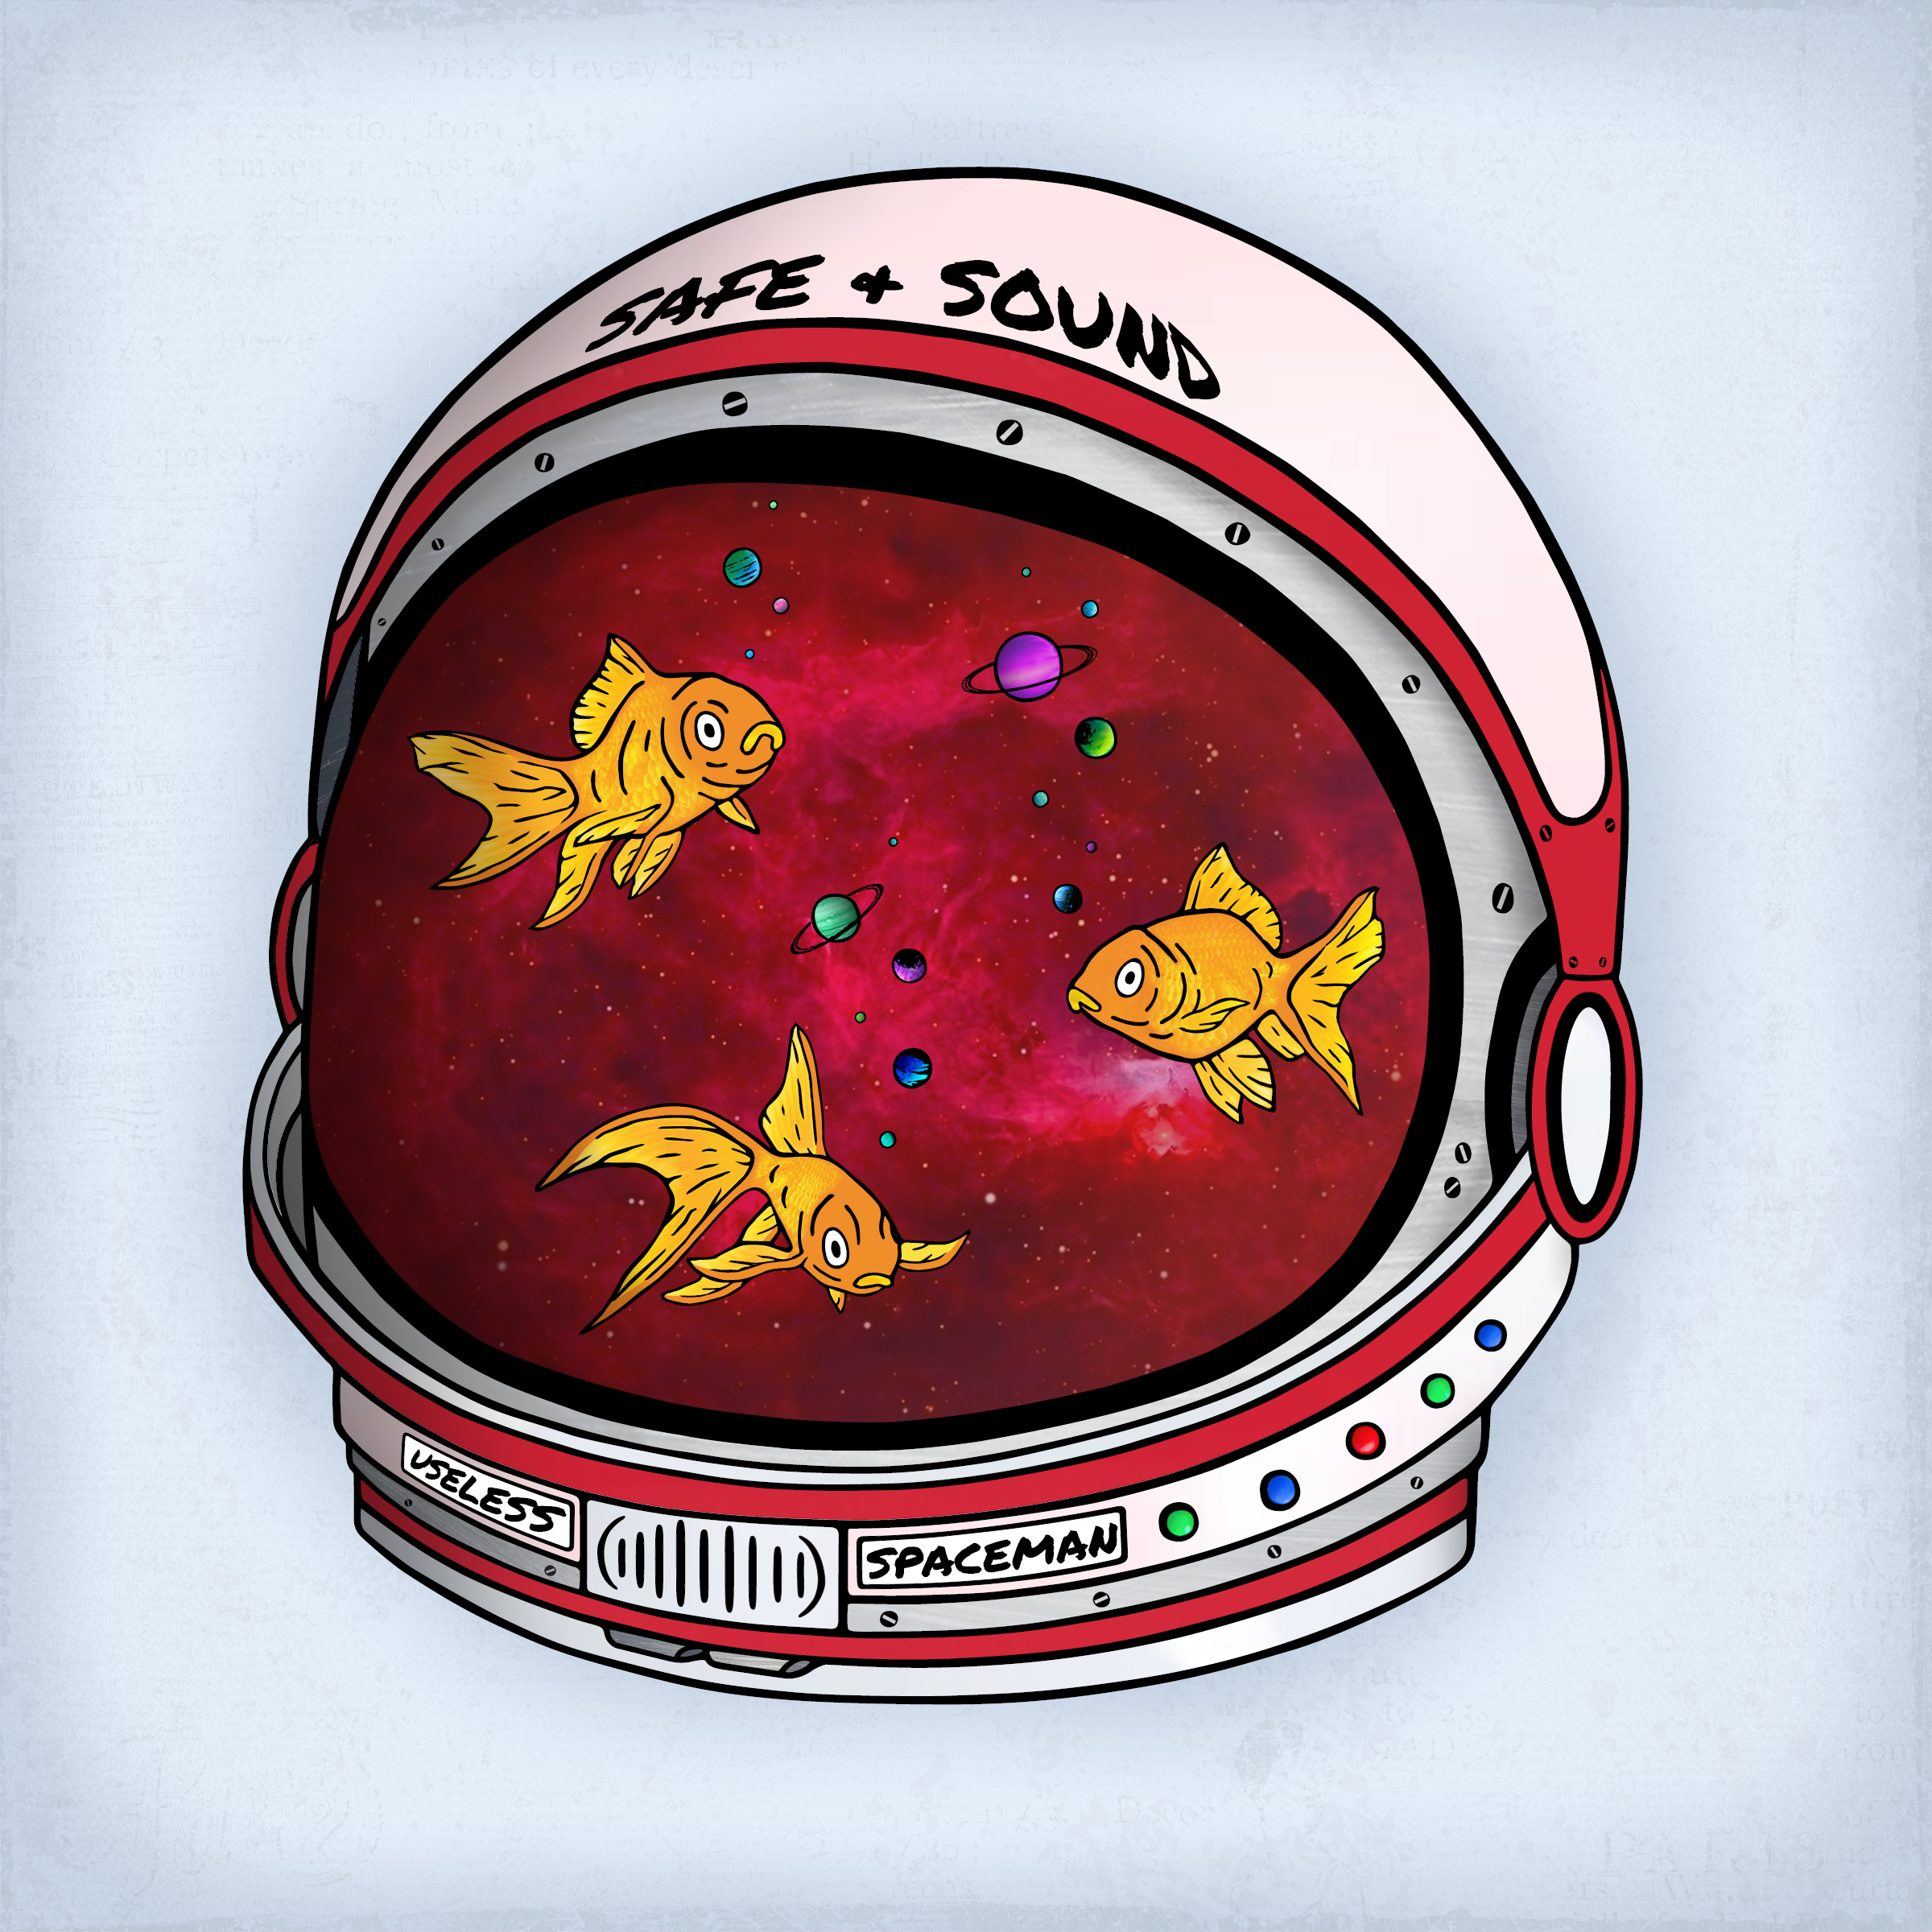 Art for Safe and Sound by Useless Spaceman